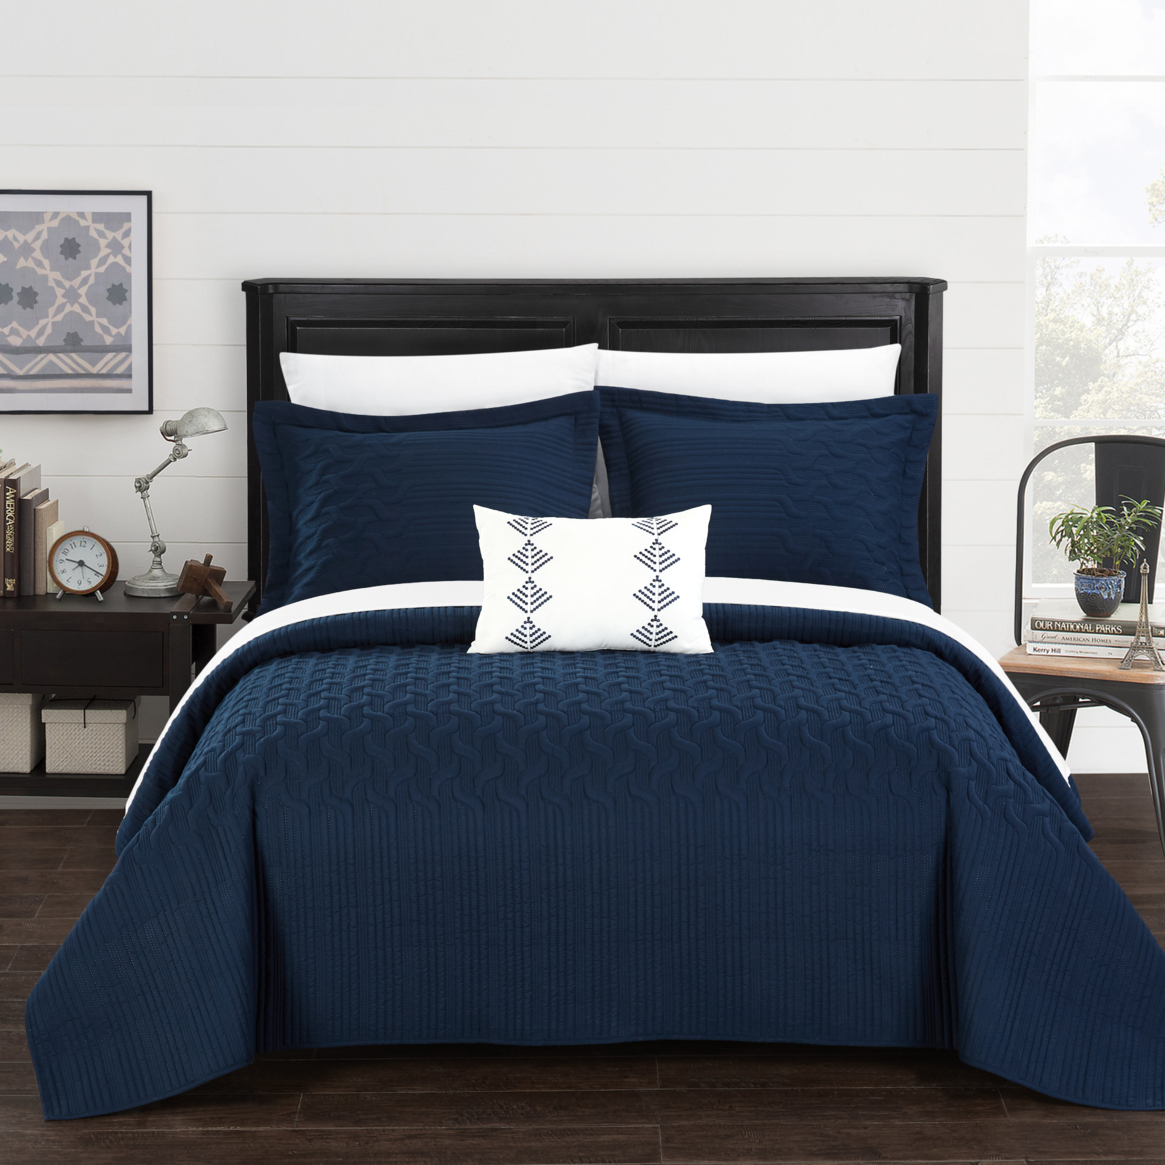 Shaliya 8 Or 6 Piece Quilt Cover Set Interlaced Vine Pattern Quilted Bed In A Bag - Navy, Queen